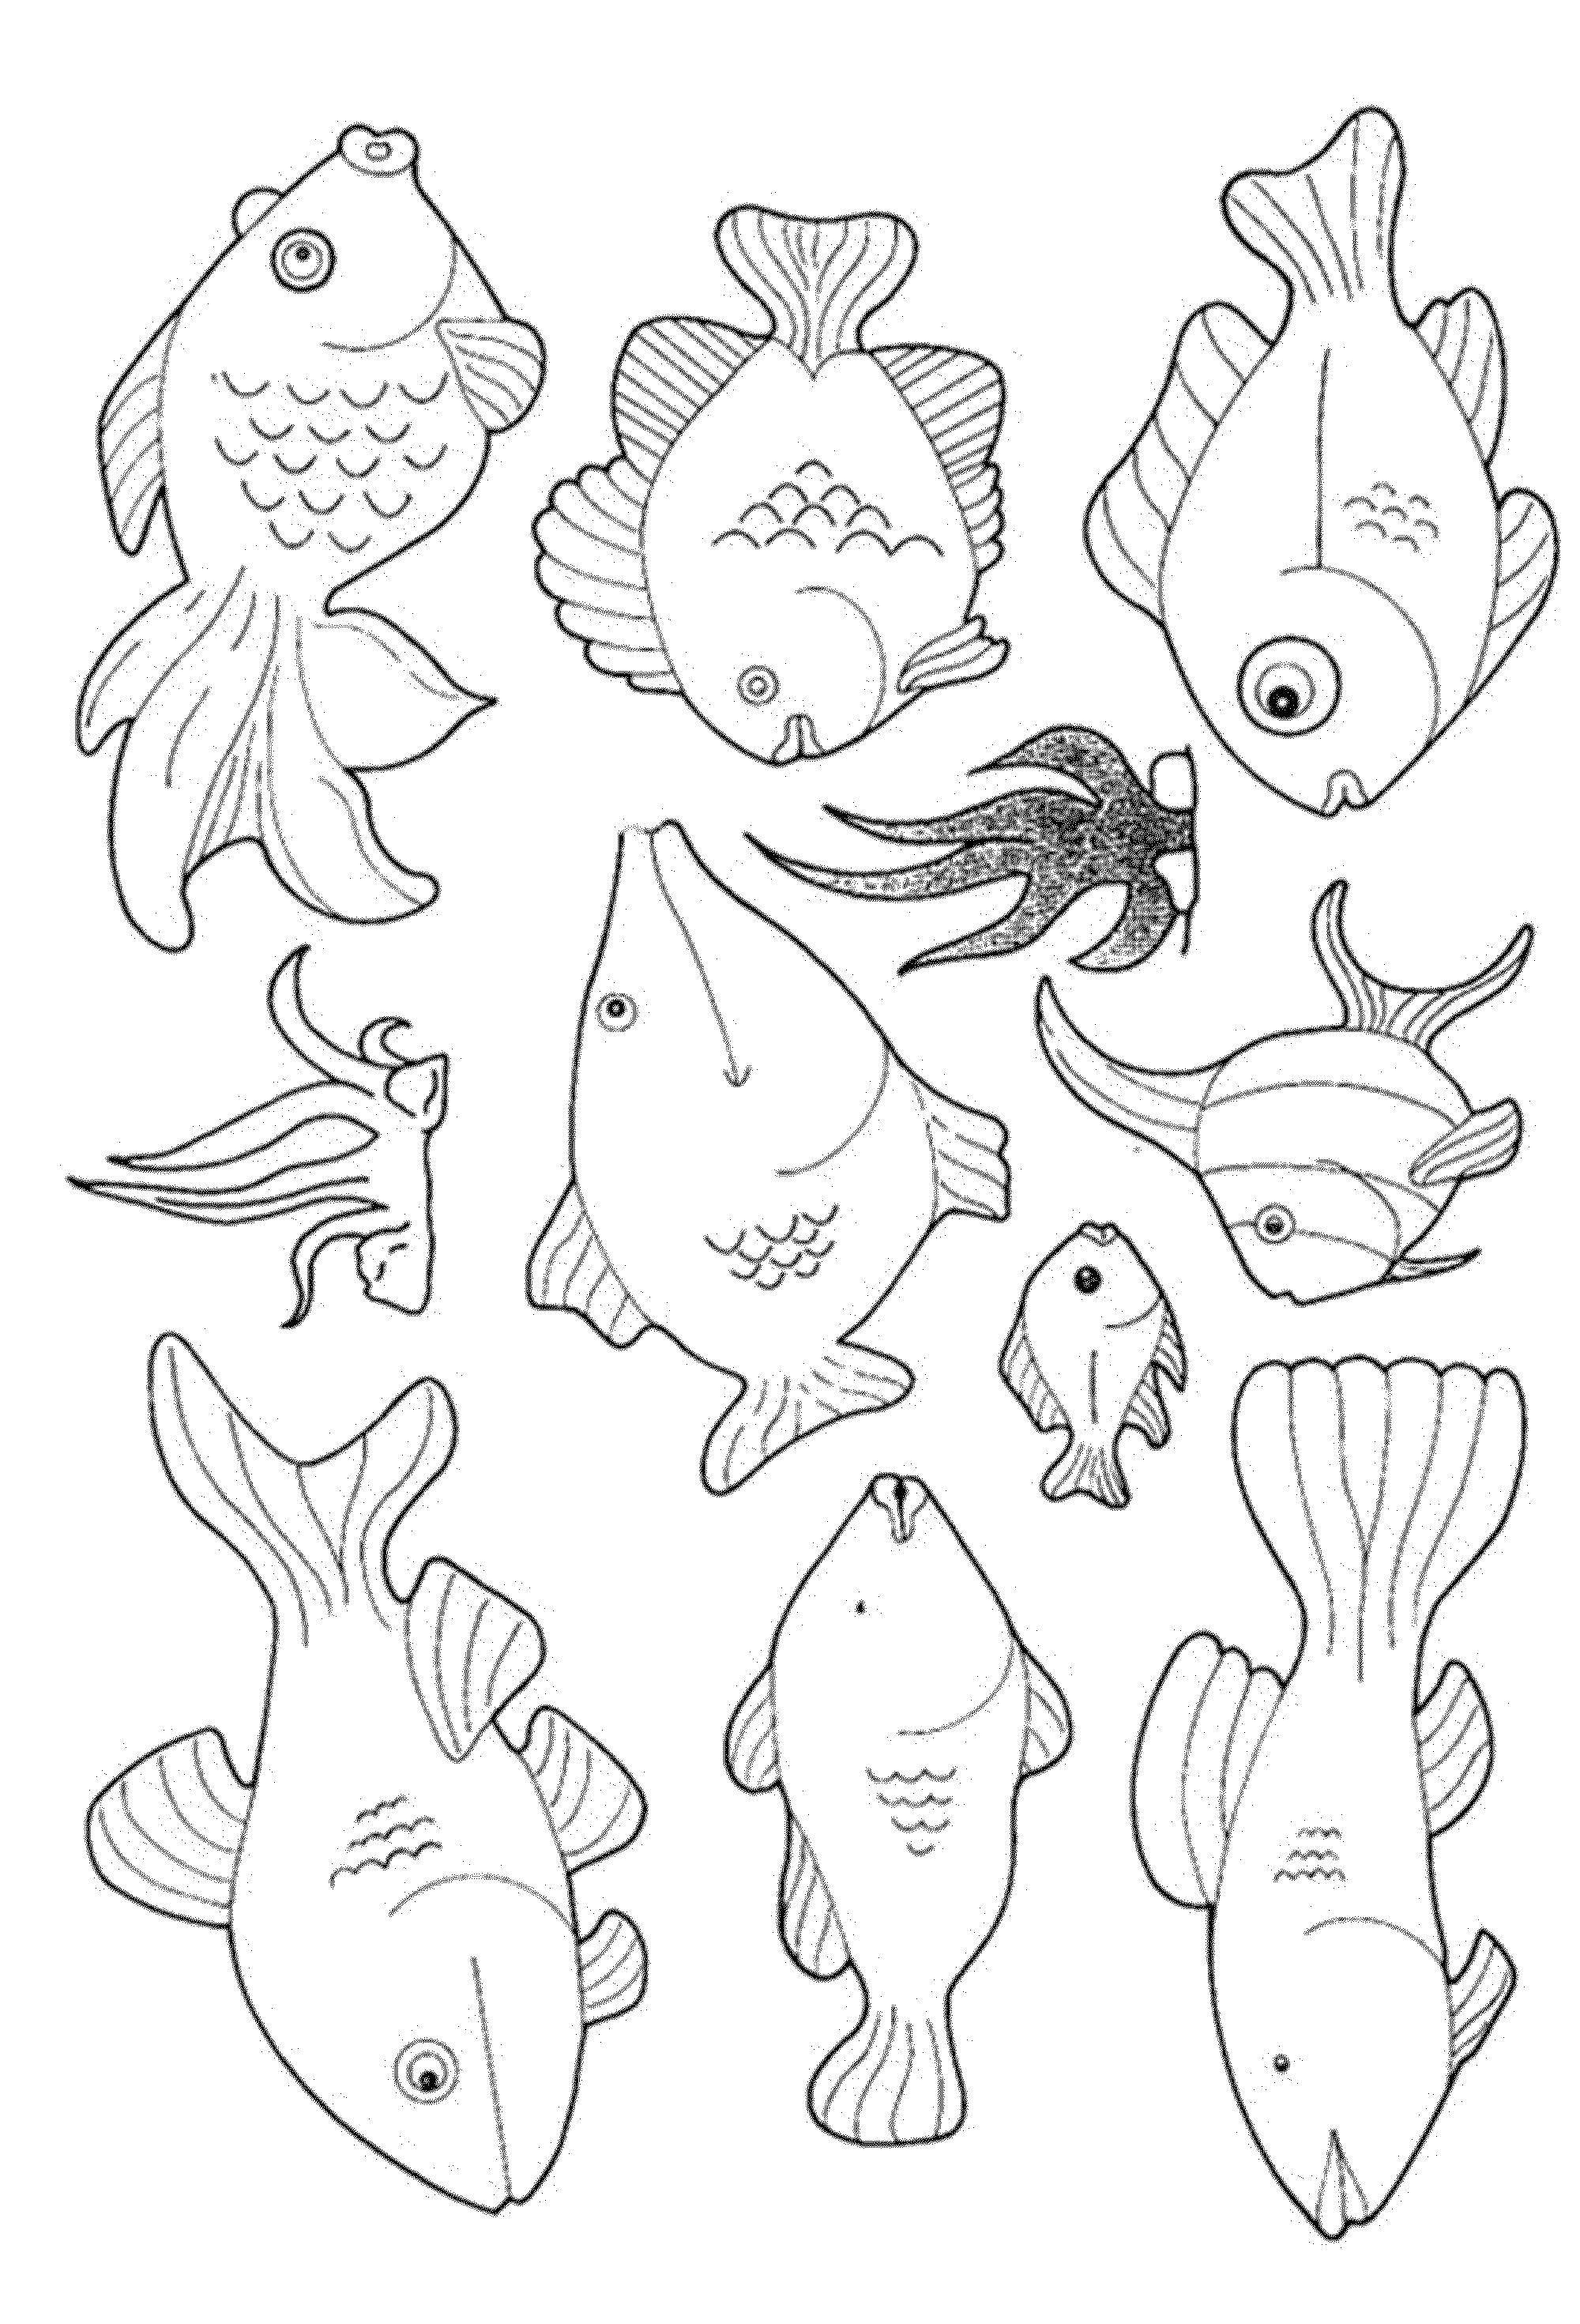 Coloring Different types of fish. Category fish. Tags:  Underwater world, fish.